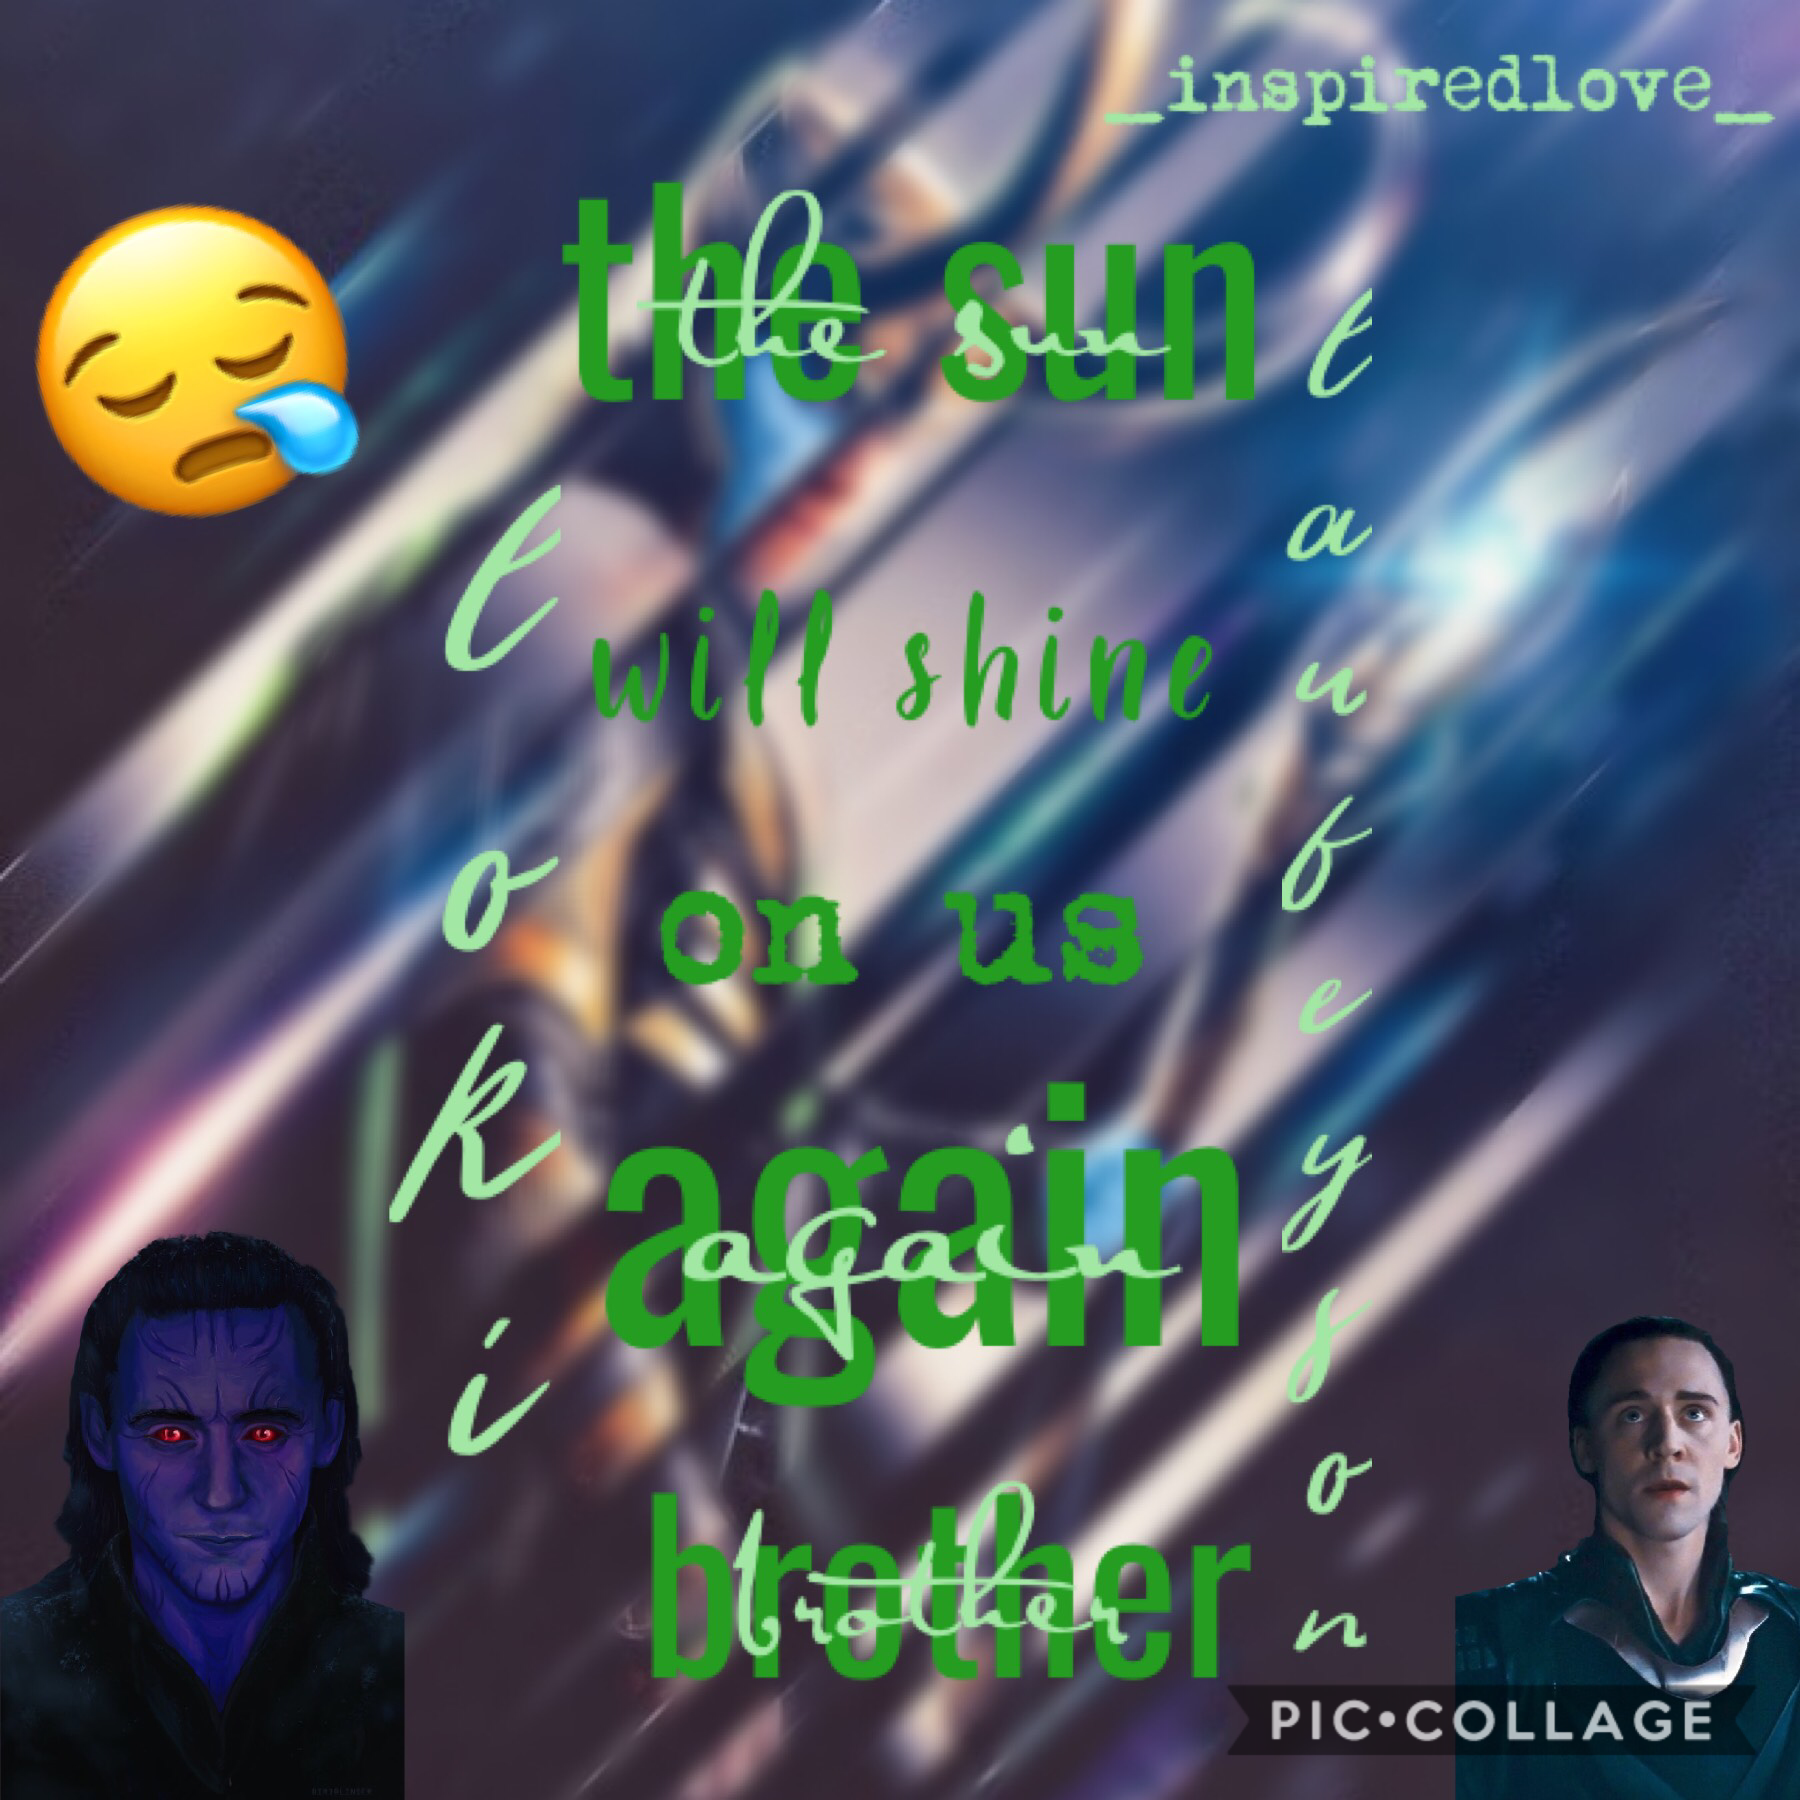 *spoiler alert for avengers infinity war and avengers endgame*


it makes me sad that loki died in IW but he never came back in endgame :’( 
anyways, have a good day/night 💖